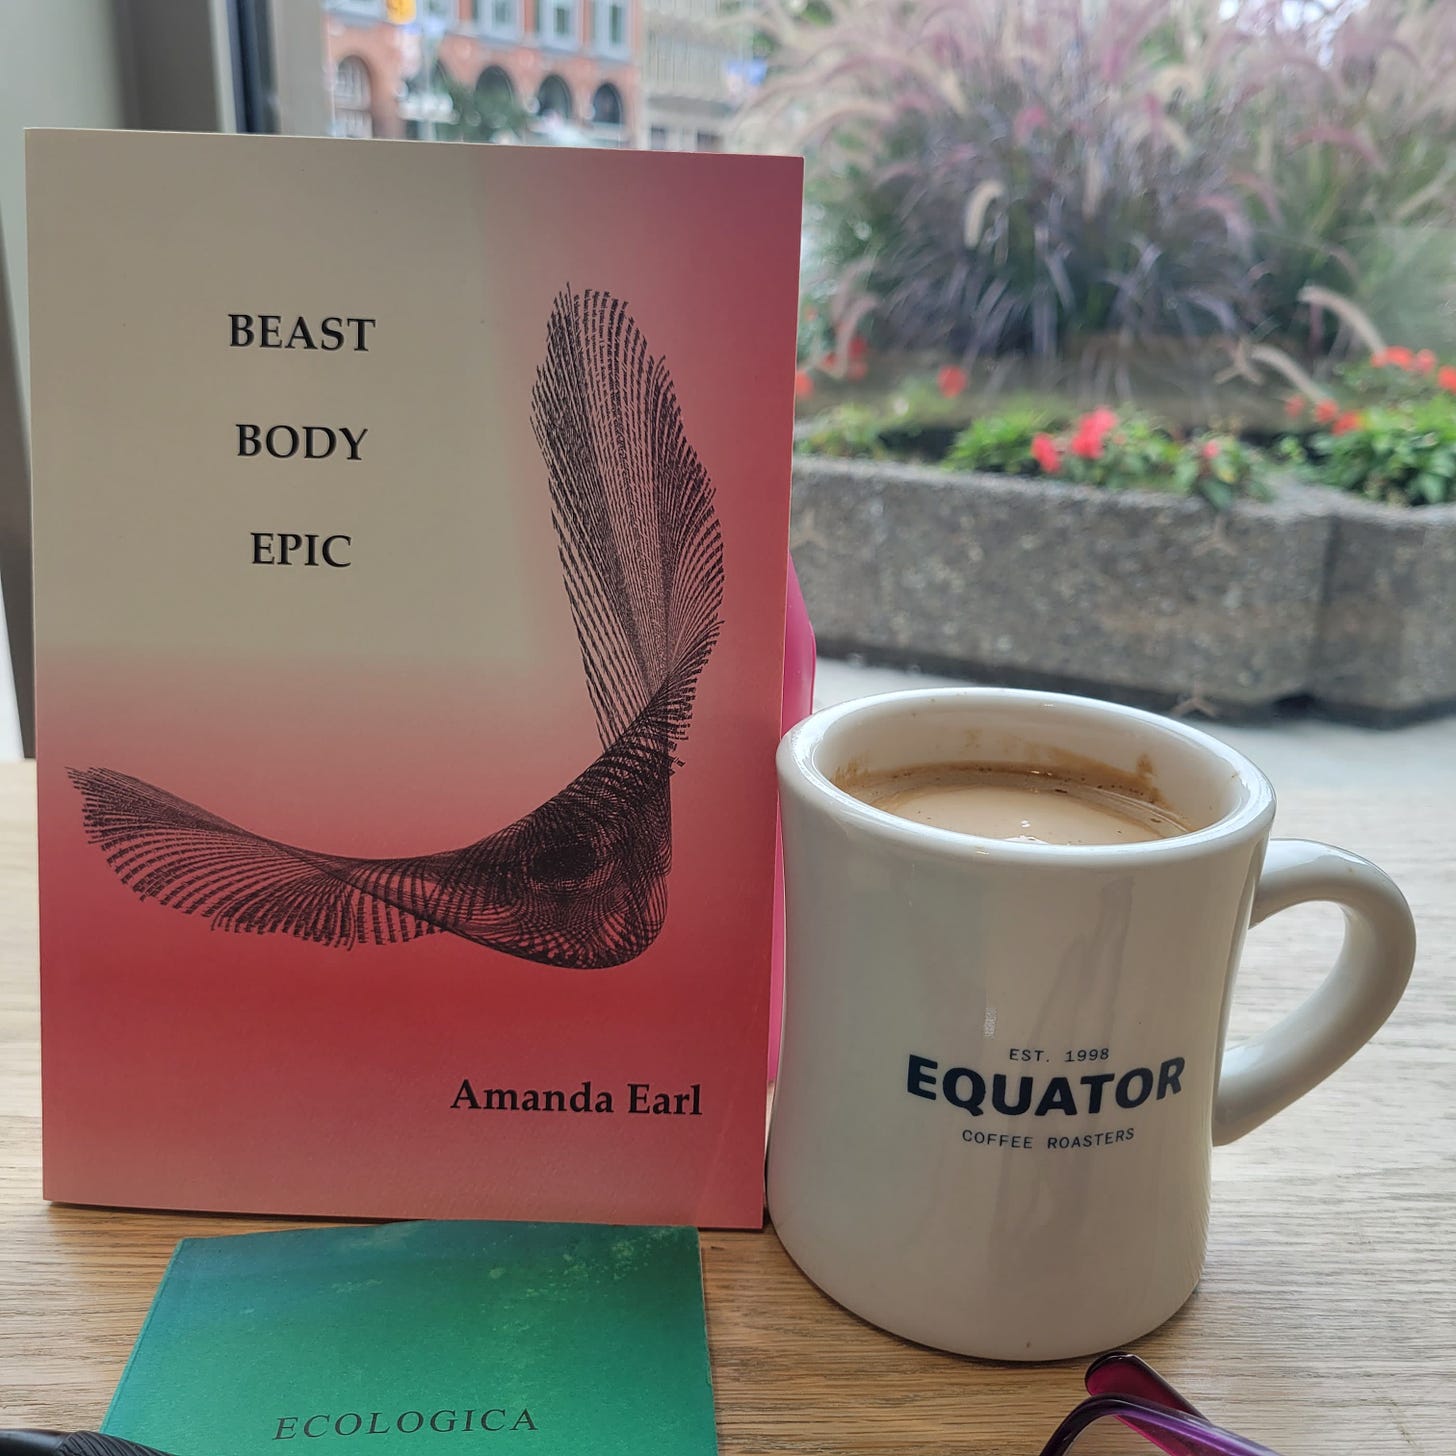 Book with red and white cover and an image of a visual poem. TEXT: BEAST/BODY/EPIC/Amaanda Earl beside an Equator coffee mug full of coffee and cream in front of a window that overlooks planters and a street with buildings across the street